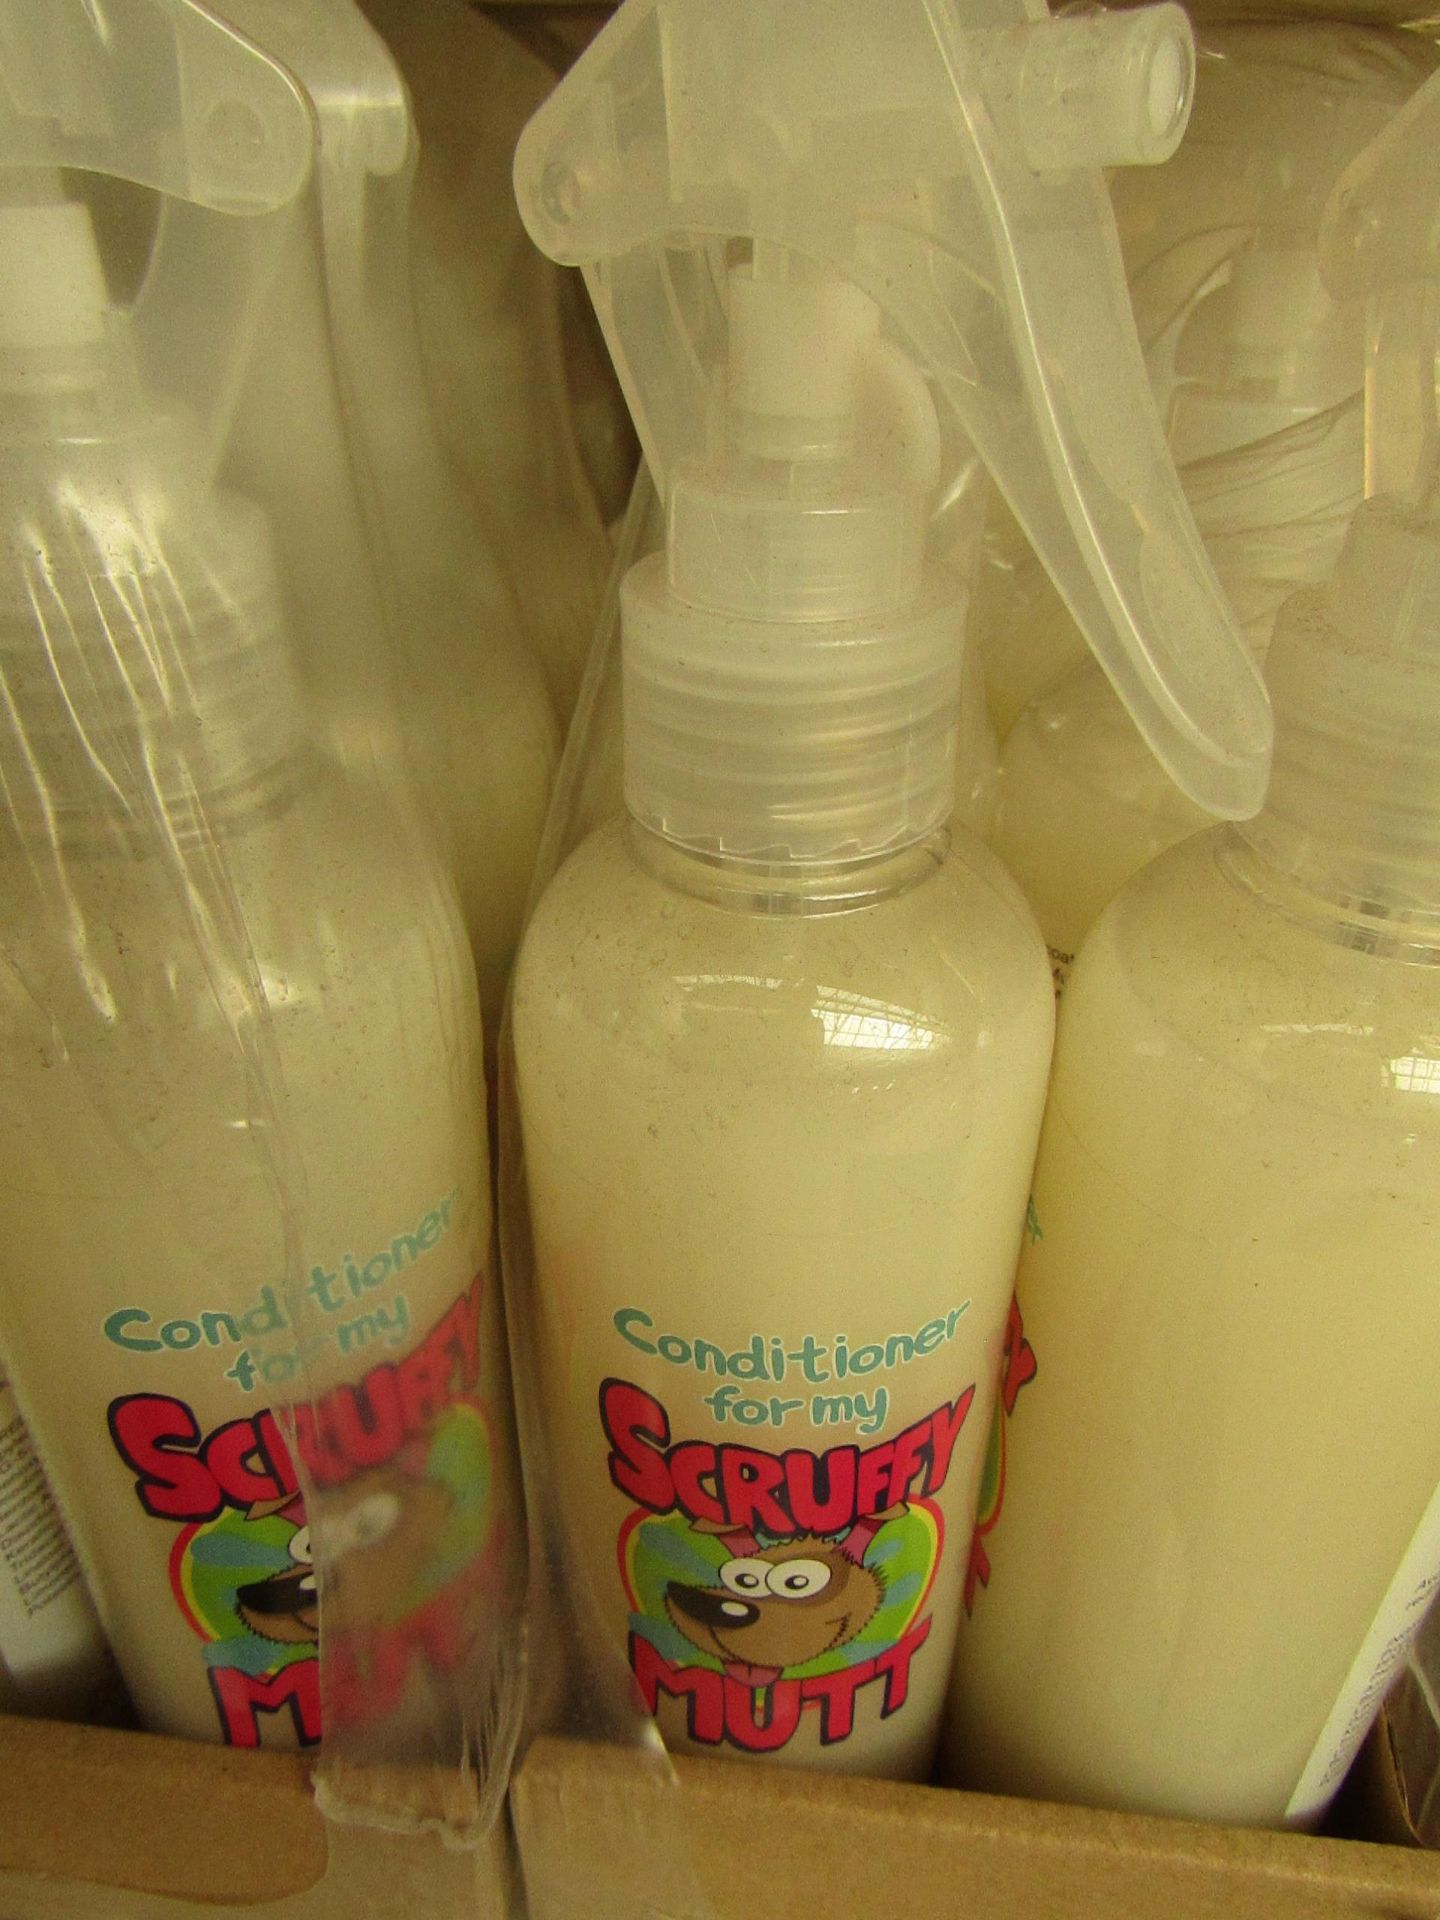 12 x 250ml Conditioner for Your Scruffy Mutt. Unused